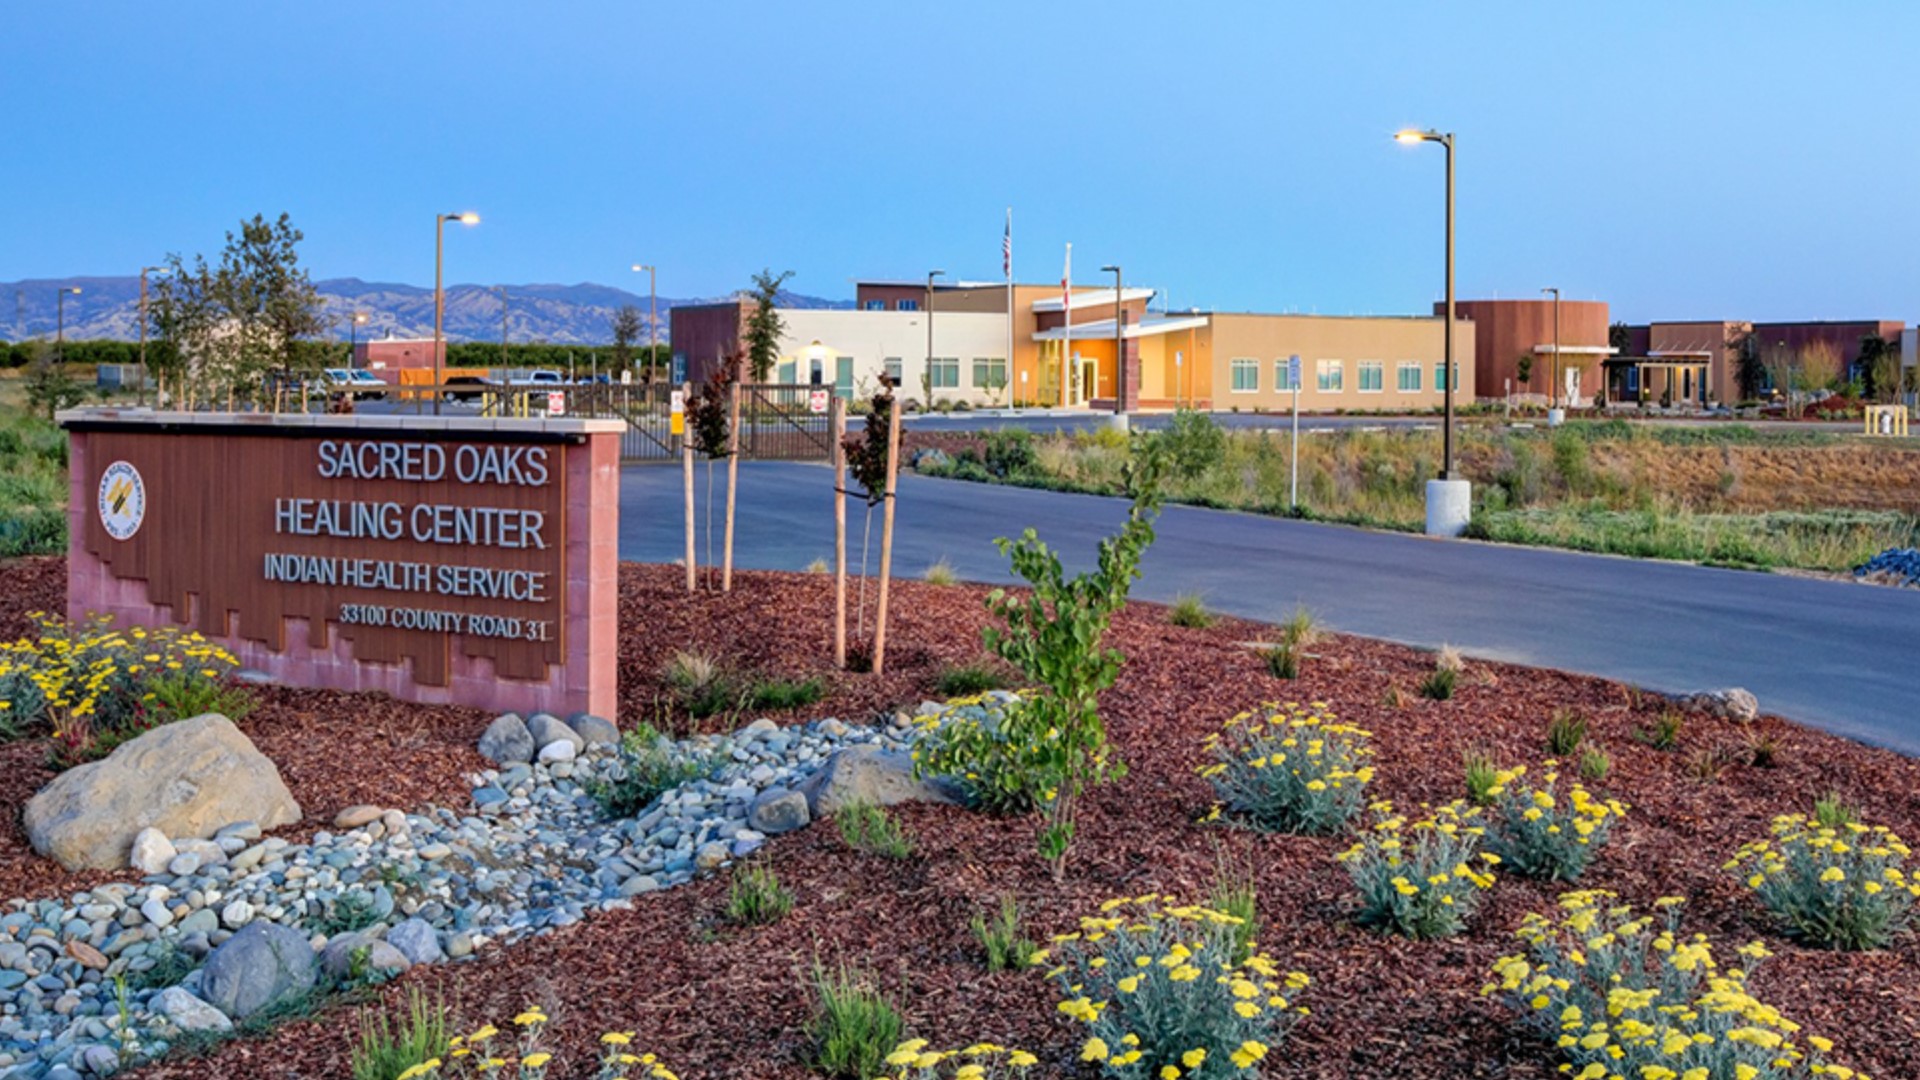 The new Sacred Oaks Healing Center will provide culturally appropriate substance abuse treatment and behavioral health care for American Indians and Alaska natives.